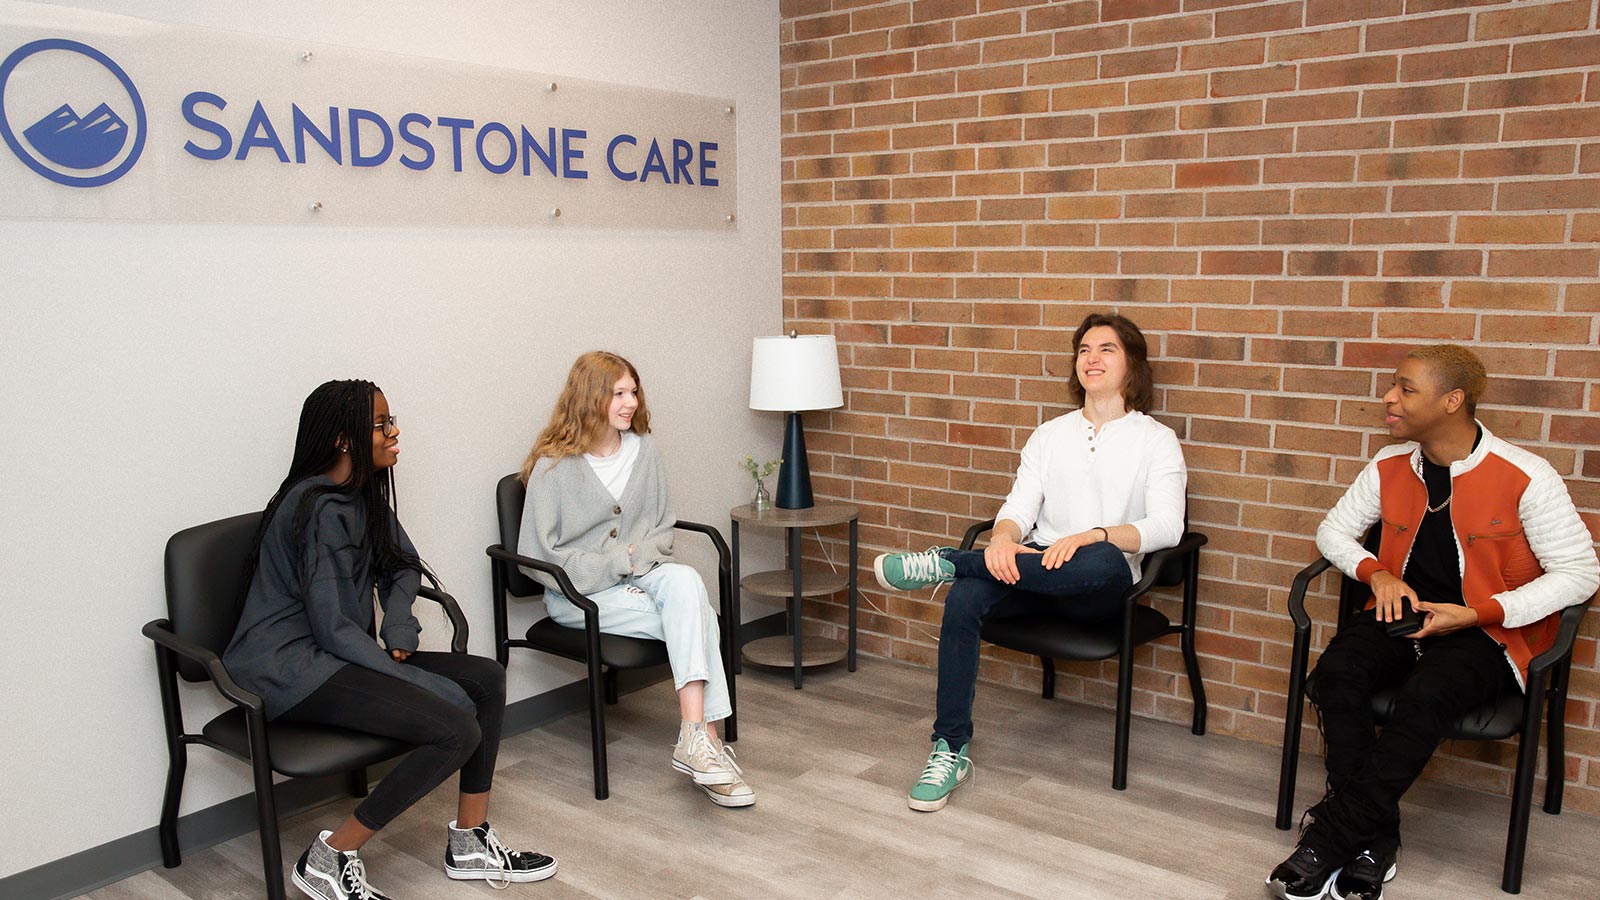 Four people sitting in a waiting area with a sign saying "Sandstone Care," having a relaxed conversation.